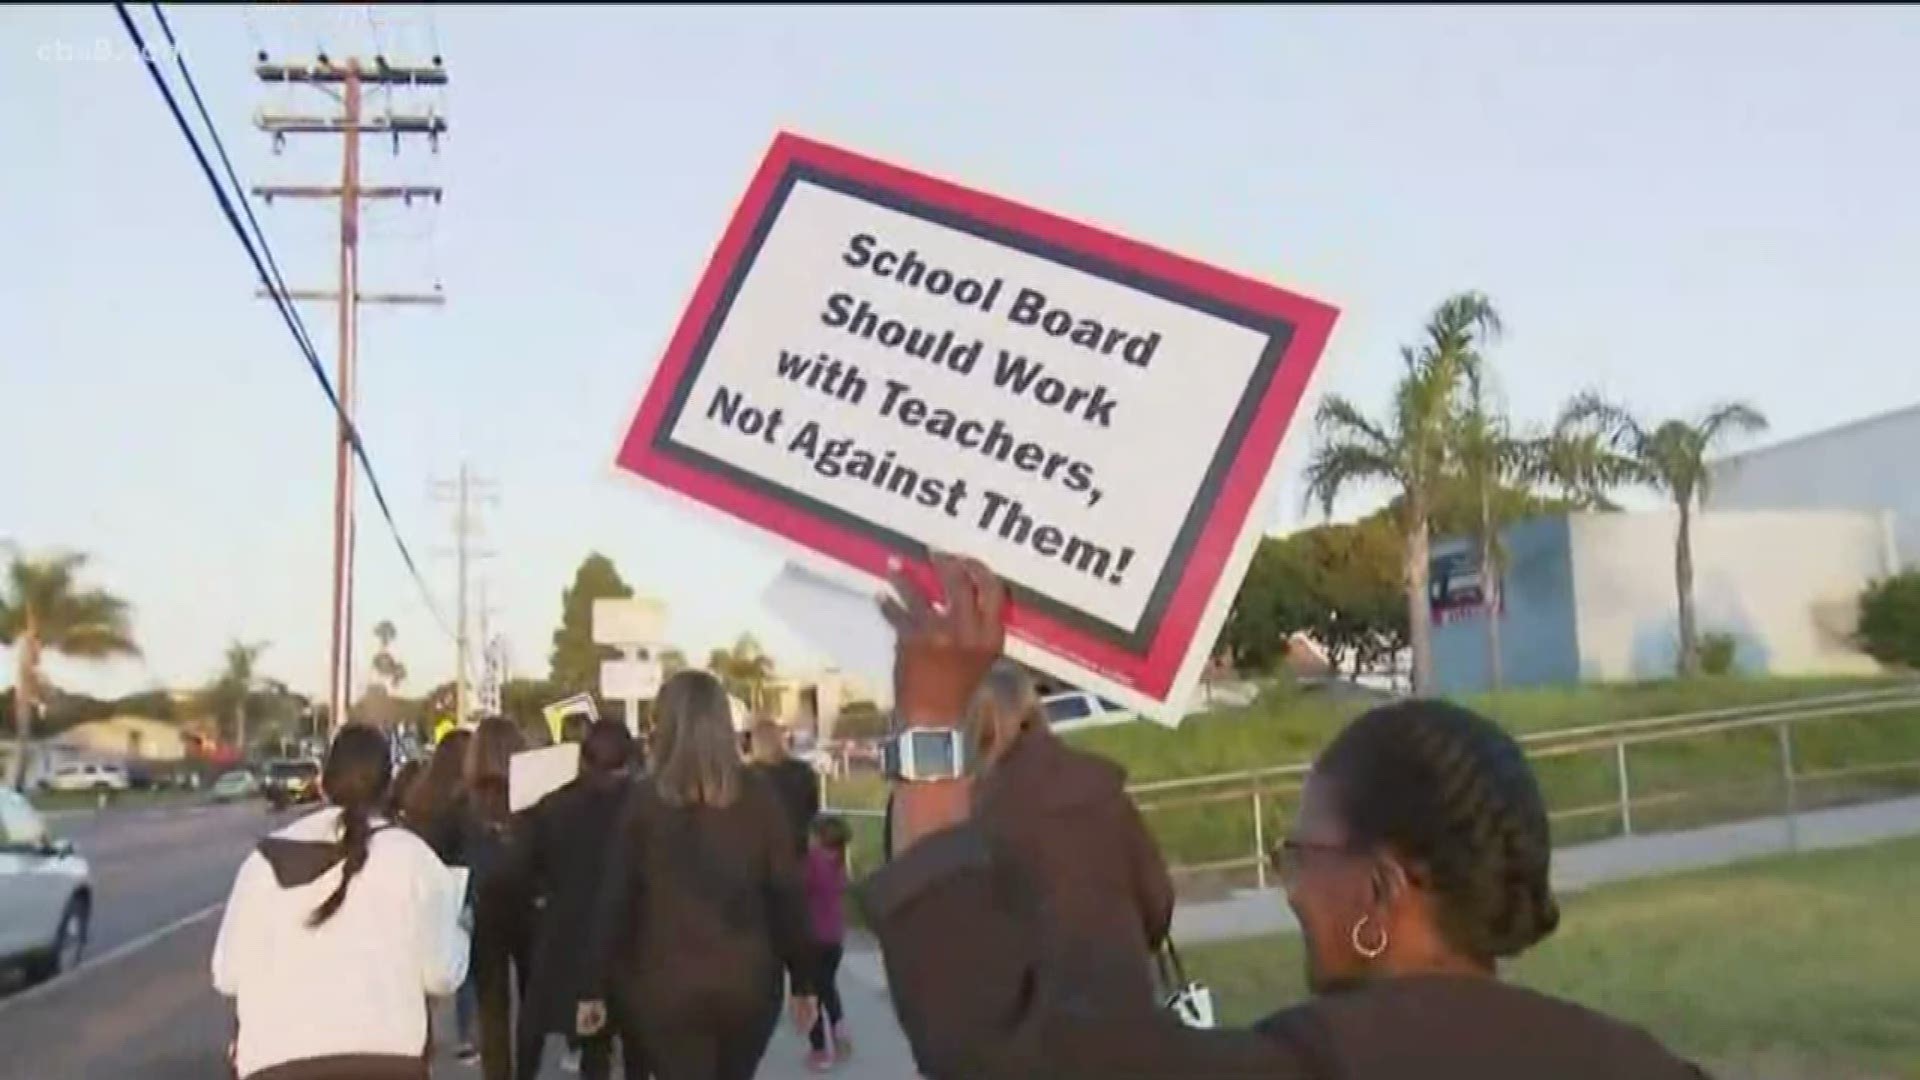 Hundreds of Chula Vista Elementary School teachers took to the streets today demanding better pay and benefits.